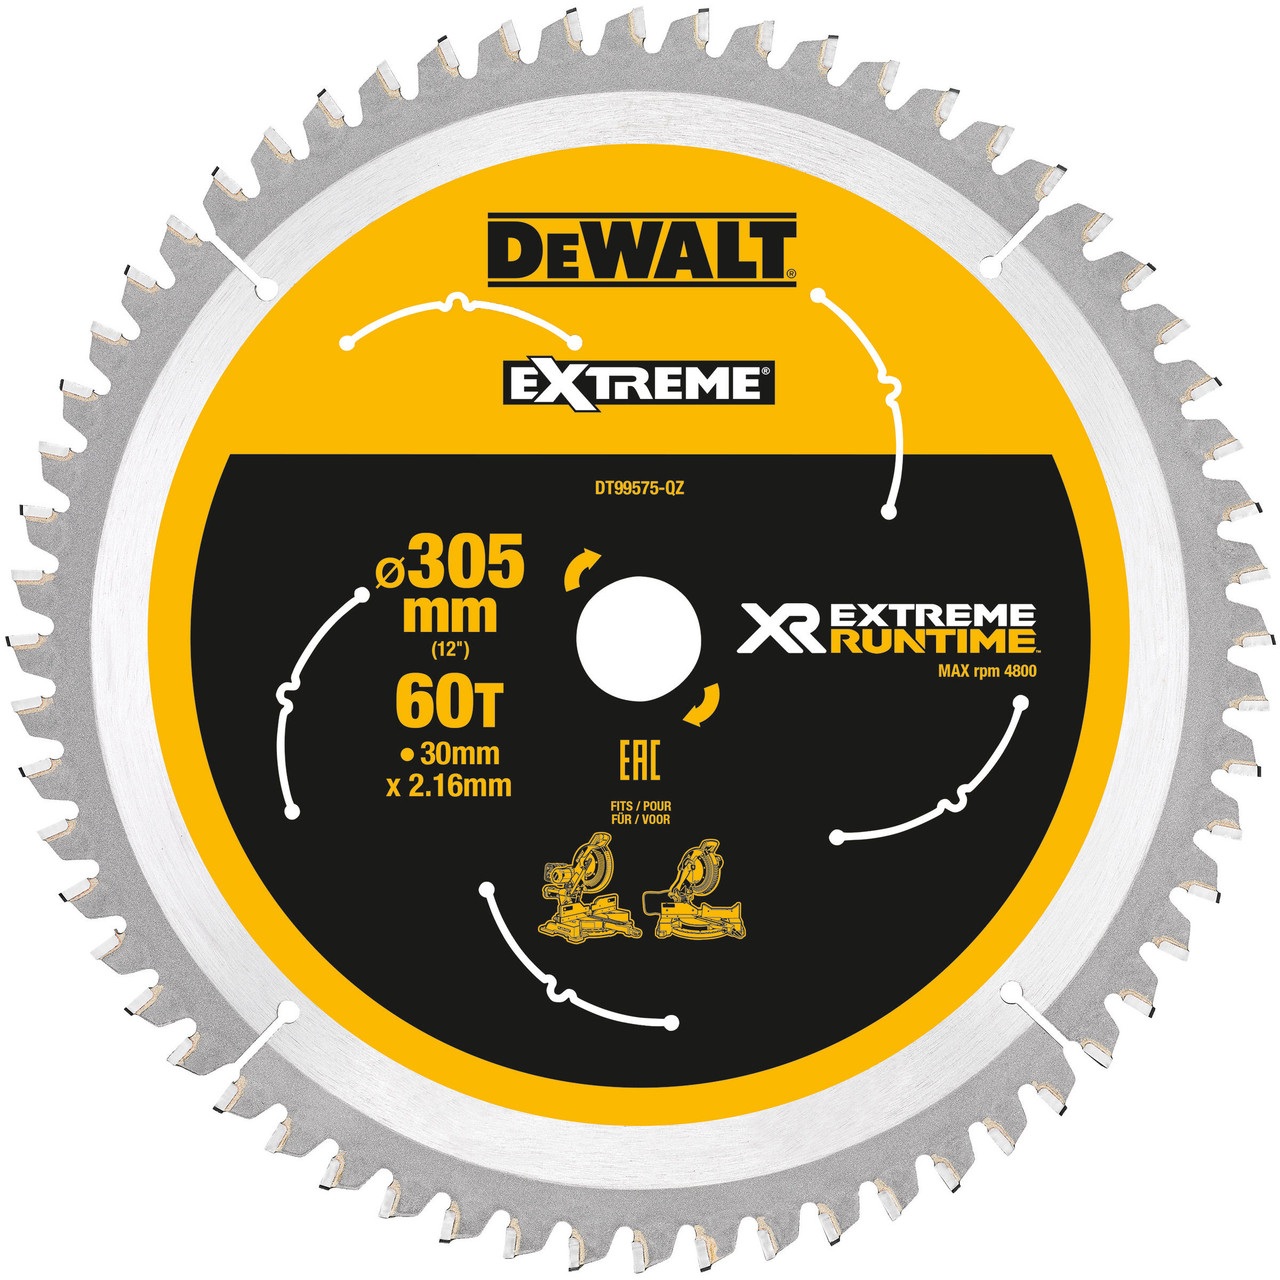 Photos - Chain / Reciprocating Saw Blade DeWALT DT99575 XR Extreme Runtime Mitre Saw Blade 305mm x 30mm x 60T 